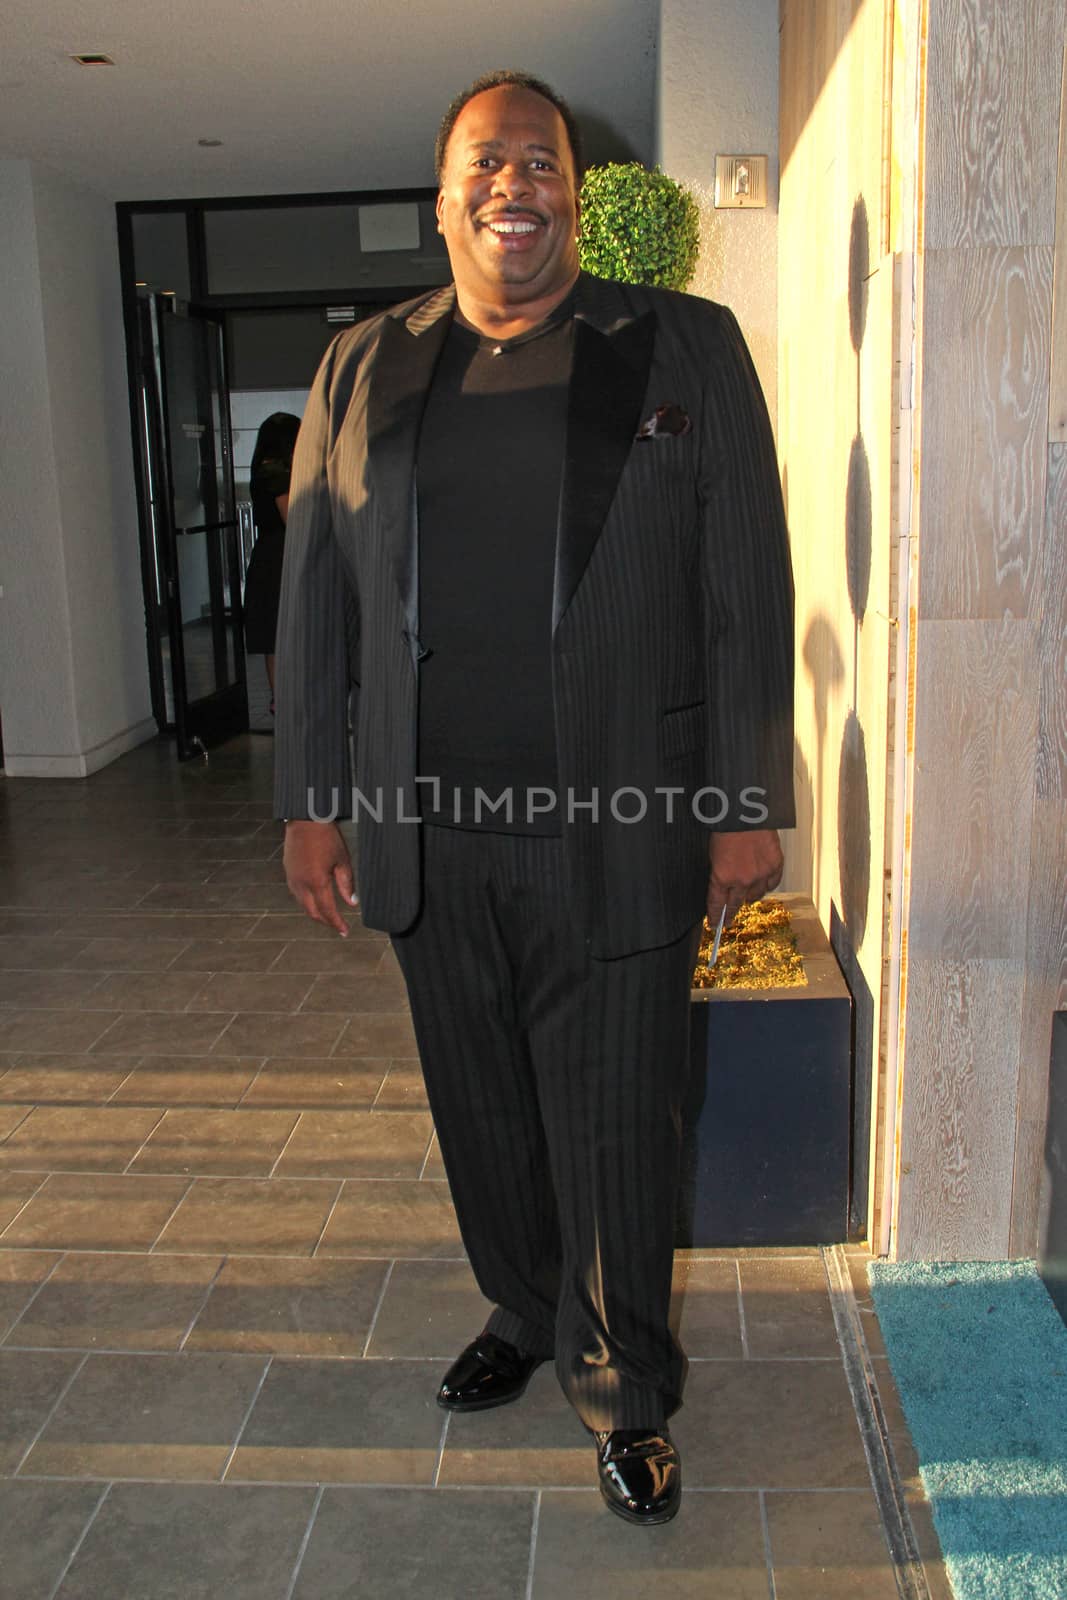 Leslie Baker
Mercy For Animals 15th Anniversary Gala, The London, West Hollywood, CA 09-12-14/ImageCollect by ImageCollect